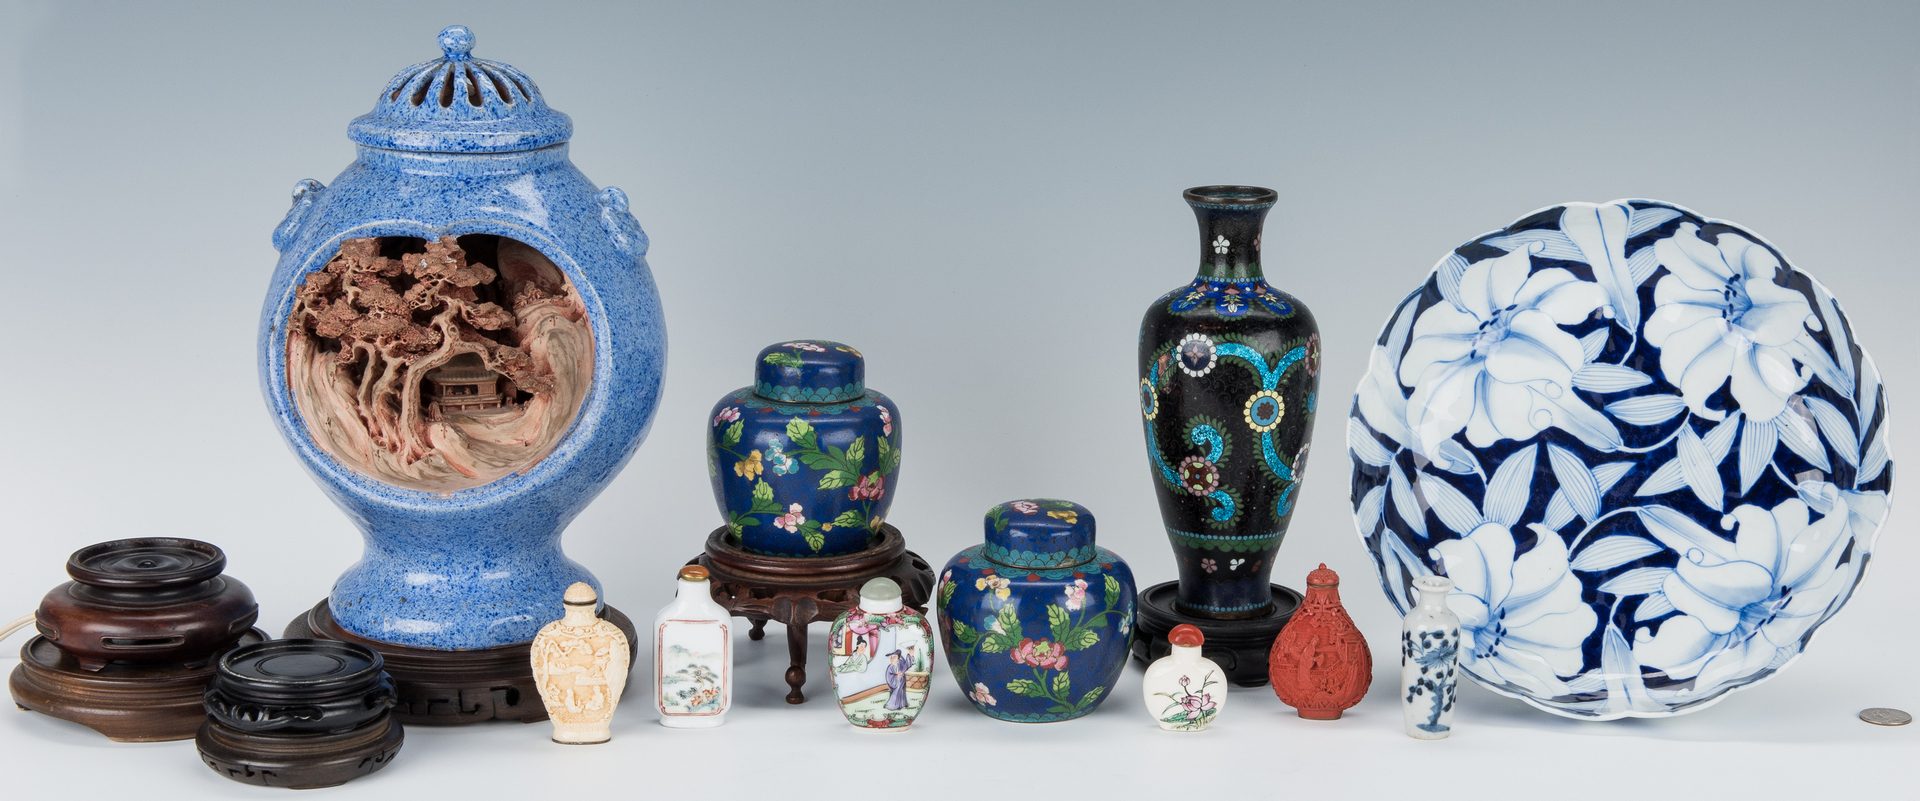 Lot 13: Group of 17 Assorted Asian Table Items